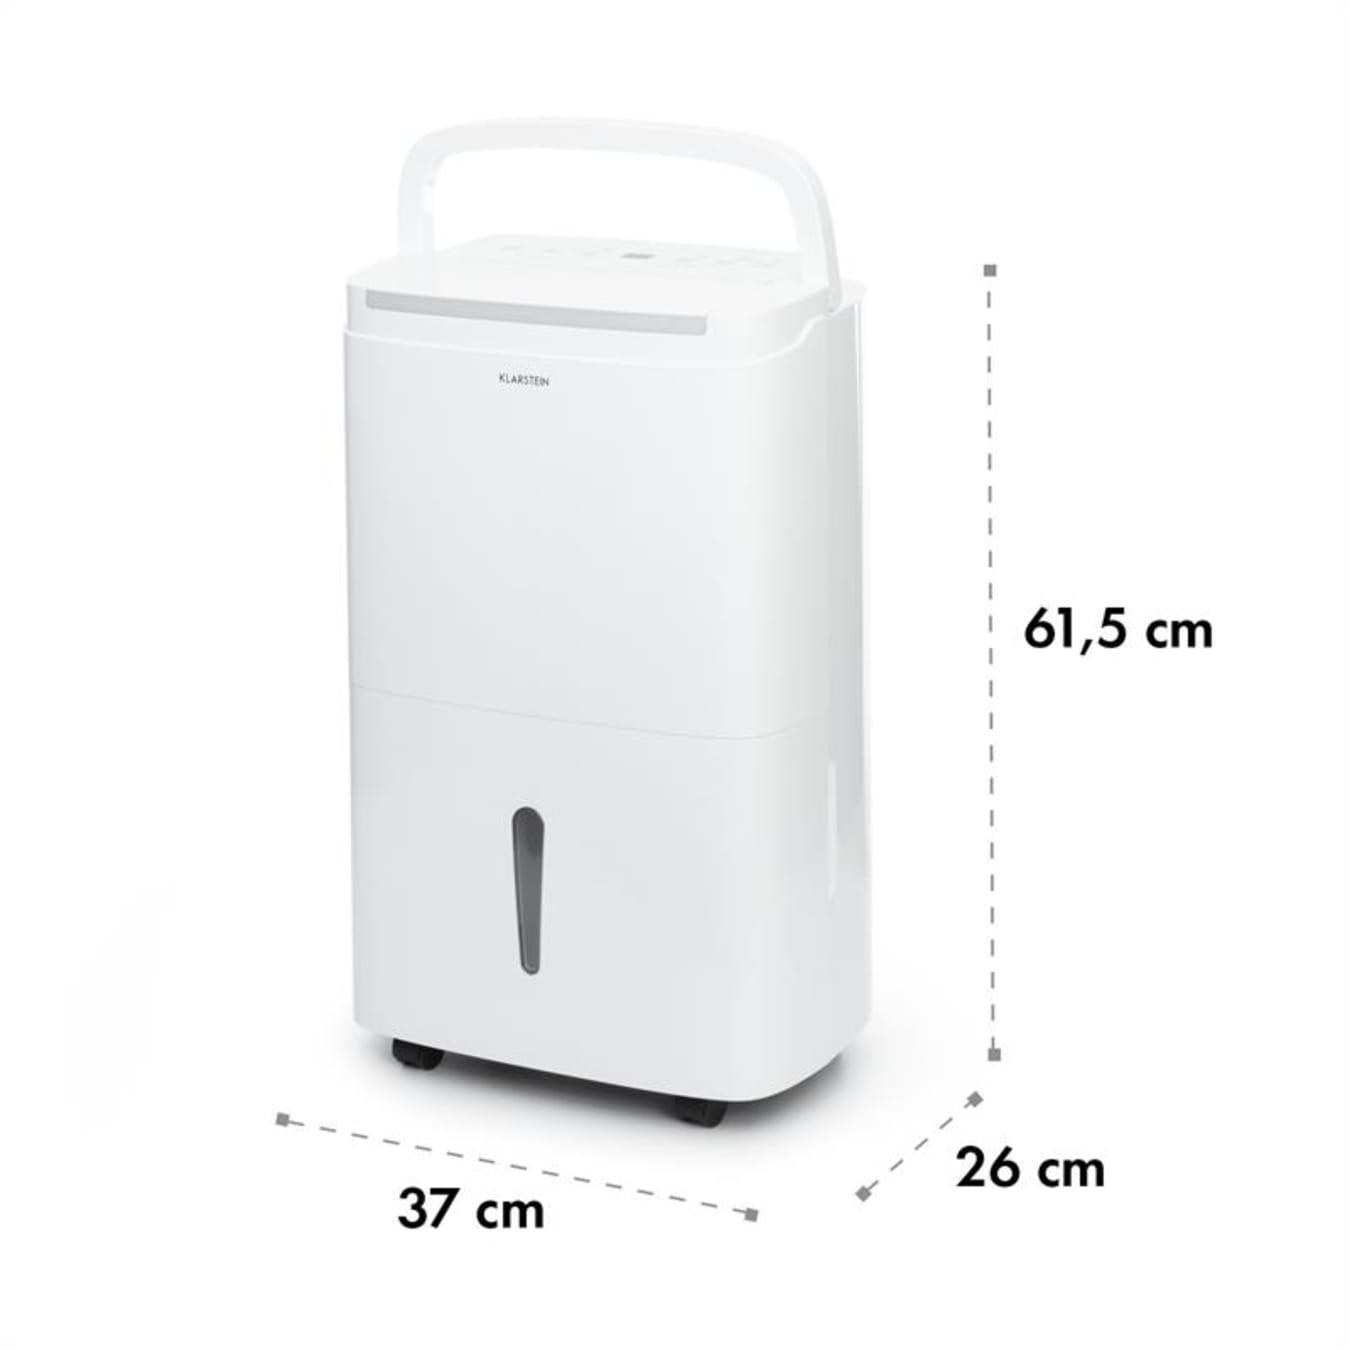 DryFy Connect 40 deumidificatore WiFi a compressione Klarstein DryFy  Connect 30 Luftentfeuchter WiFi Kompression 30l/d 25-30m² bianco